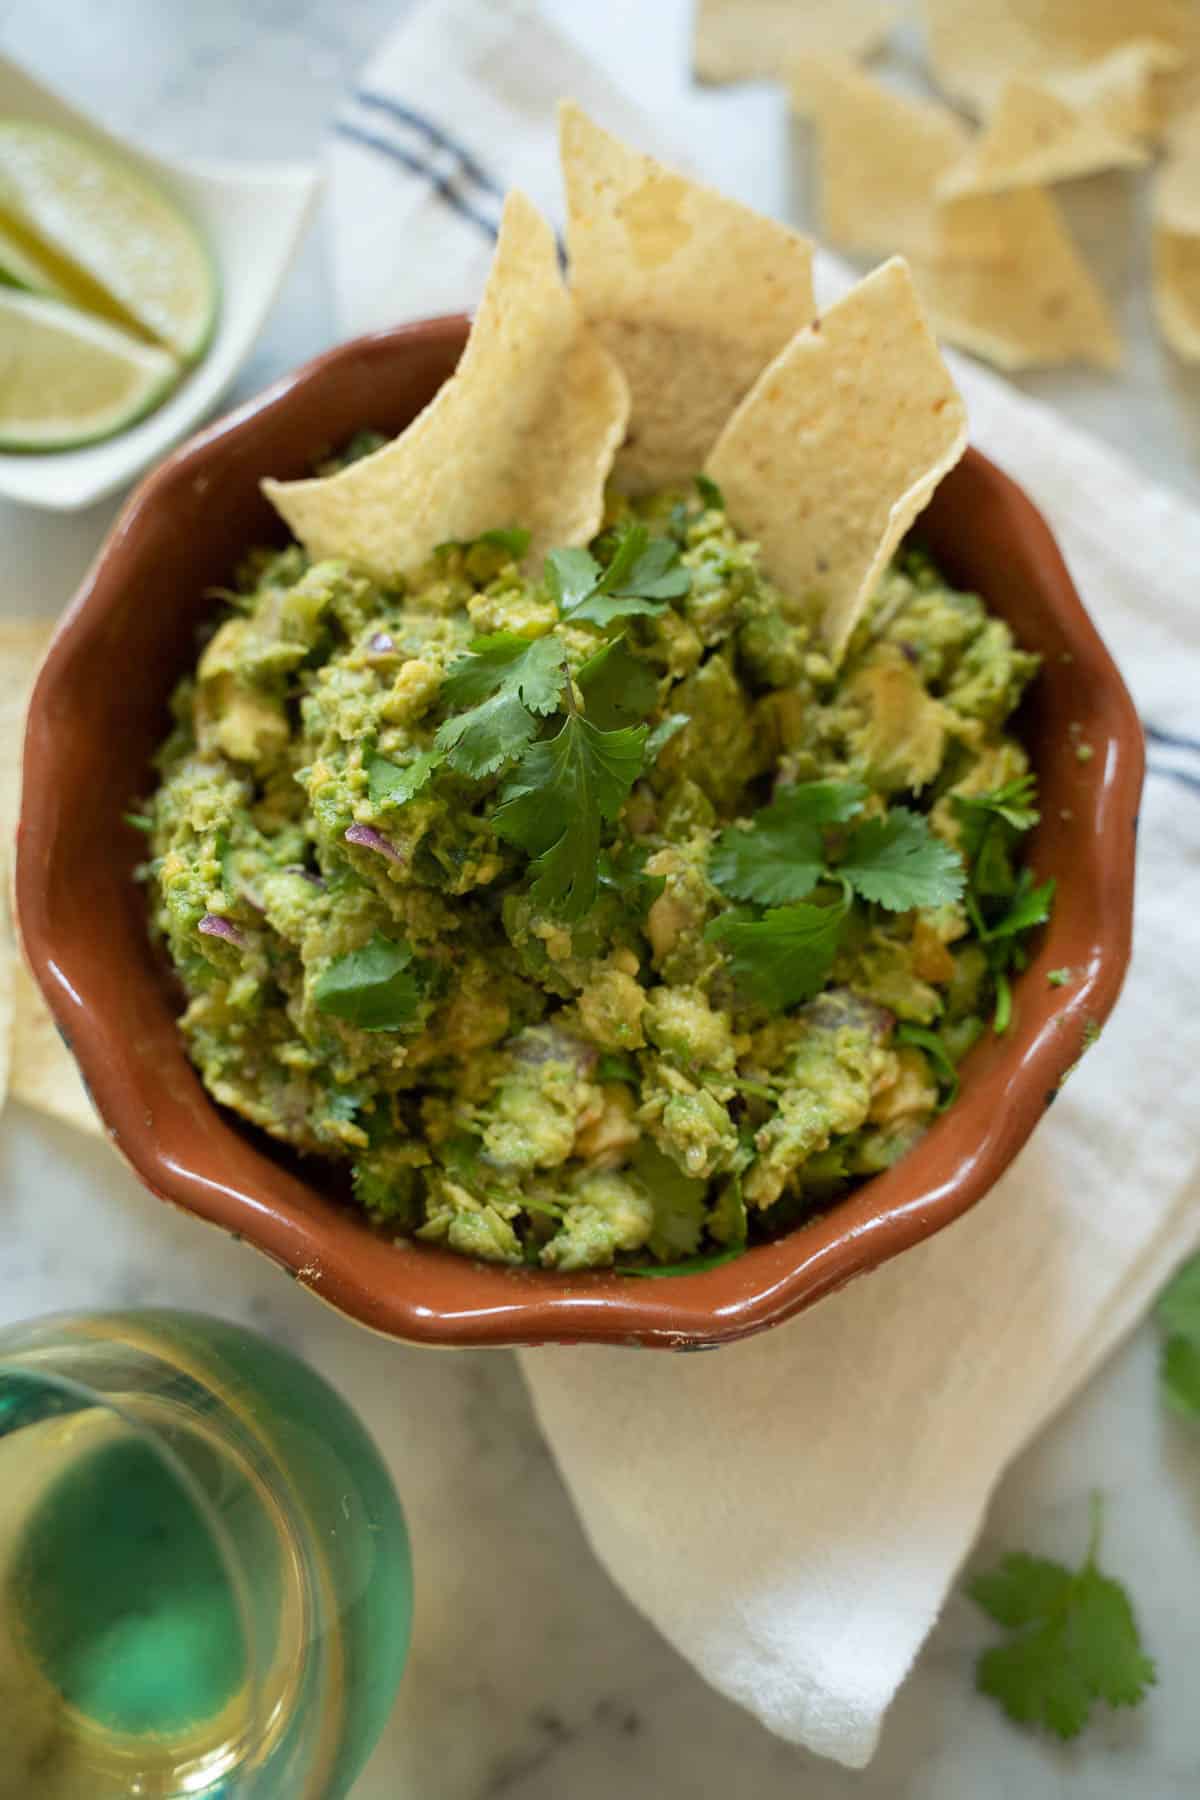 Guacamole in a brown bowl surrounded by tortilla chips and a glass of white wine